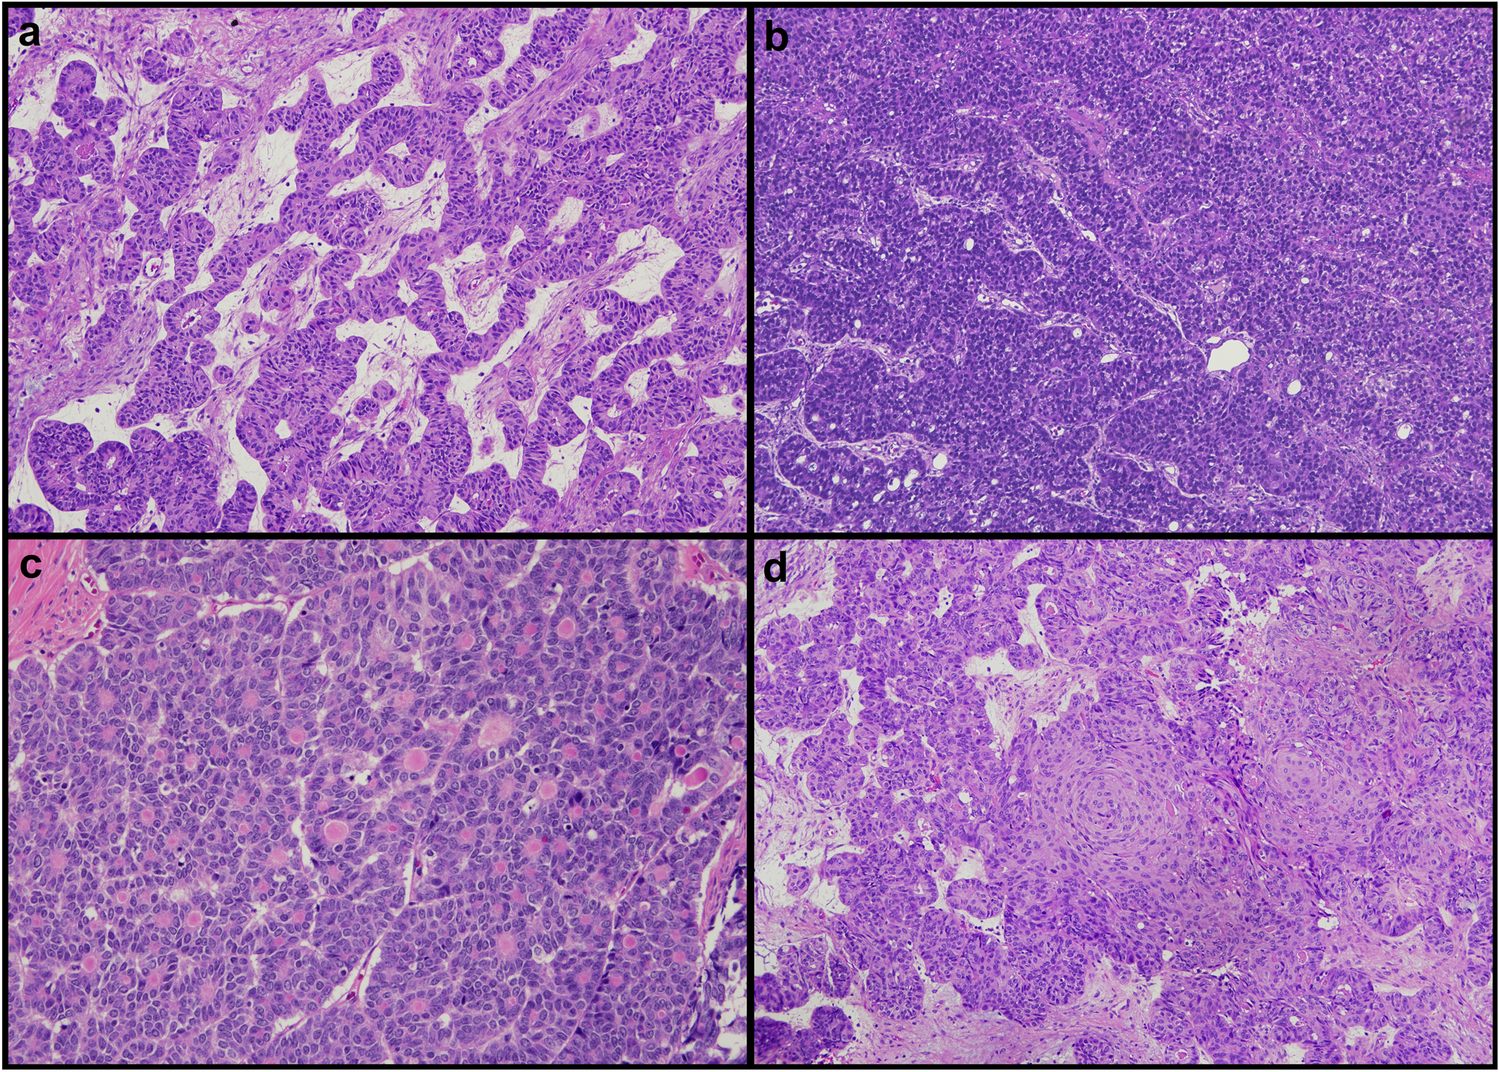 Ovarian endometrioid carcinoma with a sex cord-like pattern: a morphological, immunohistochemical, and molecular analysis